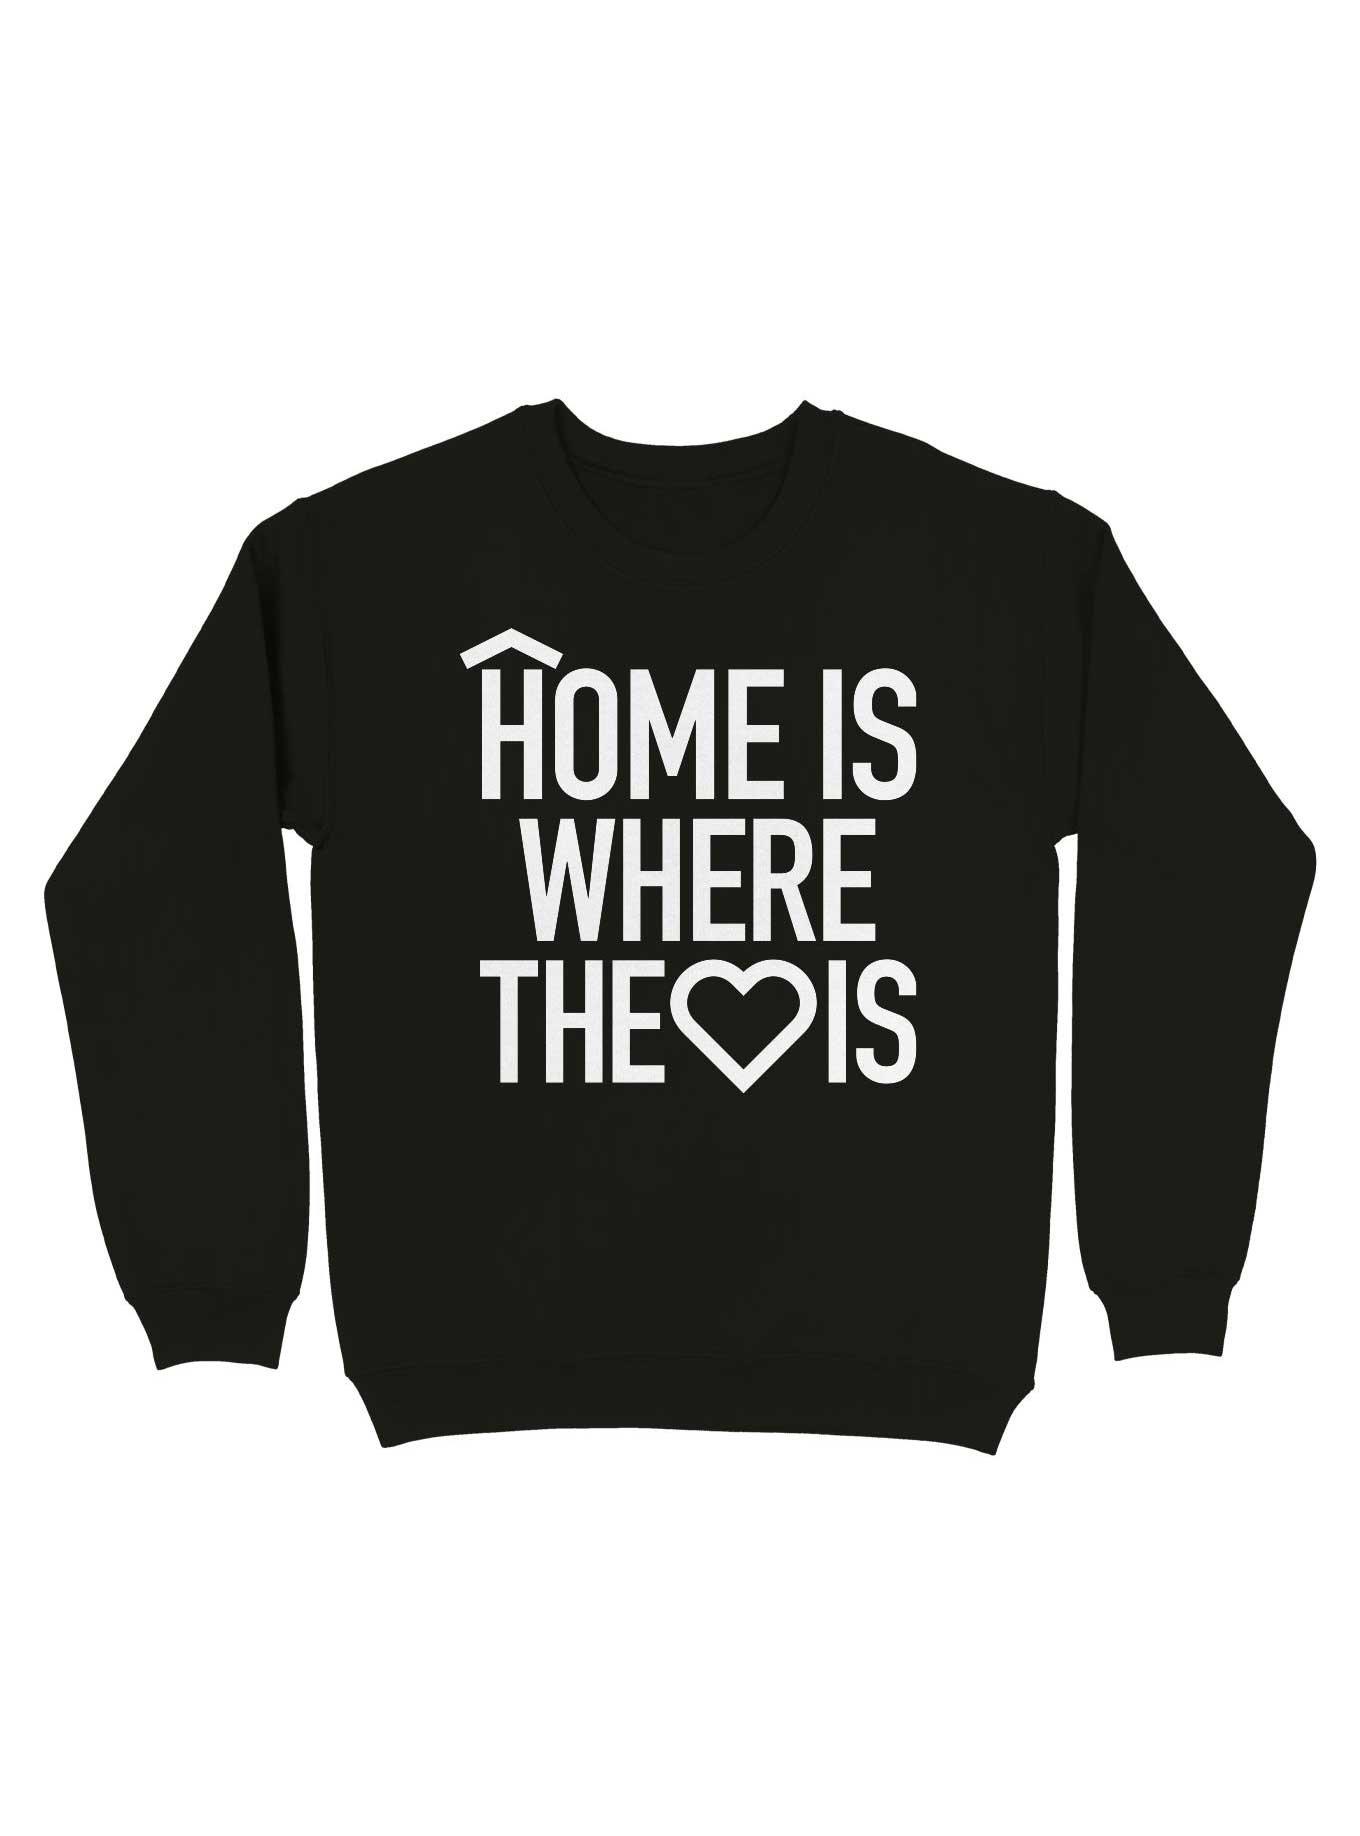 Home Is Where The Heart Is Sweatshirt, BLACK, hi-res